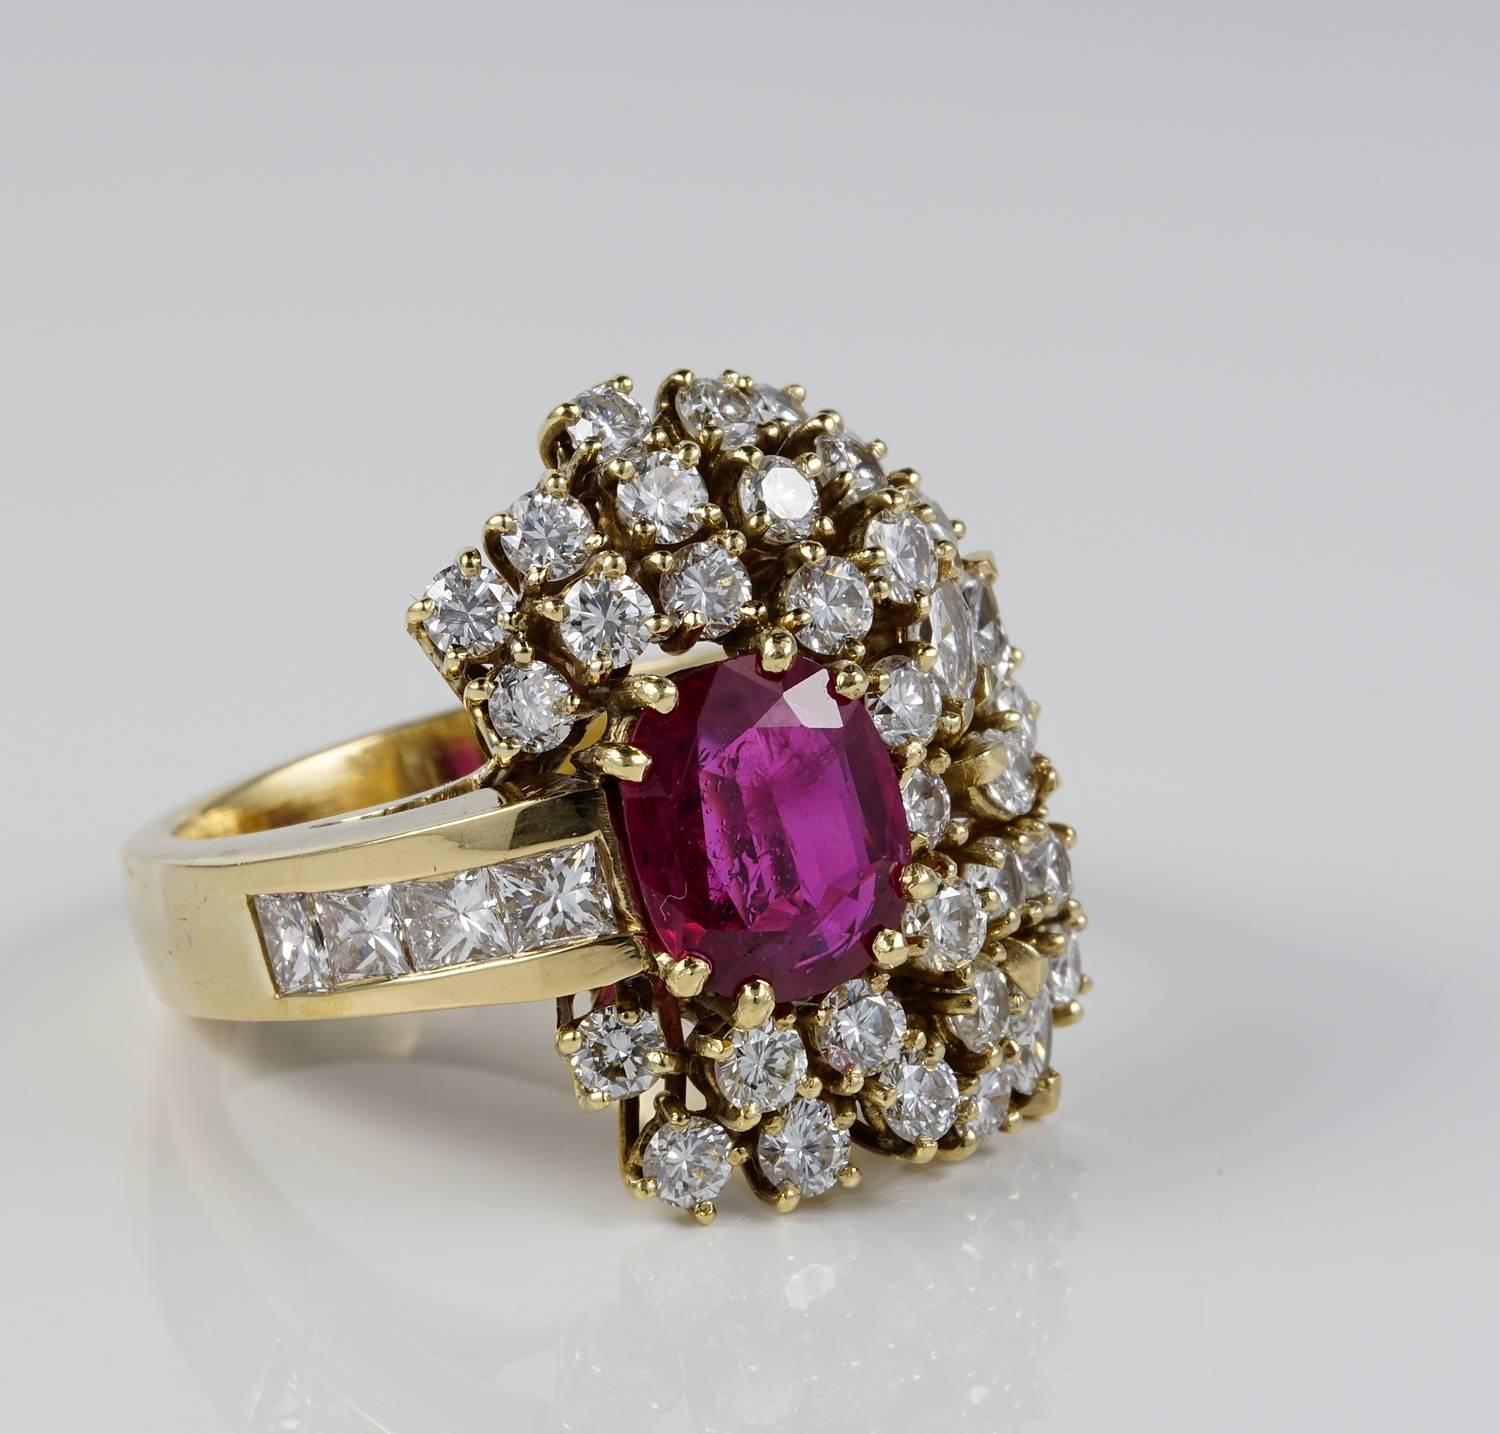 An impressive vintage ring of striking Bombe' style set with rare Ruby and lots of Diamonds
Italin origin, 1950 ca
Hand craftedof solid 18 Kt gold, marked. Weight is 16.3 grams
Centrally set with a rare Natural Ruby Siam origin - No Heat -